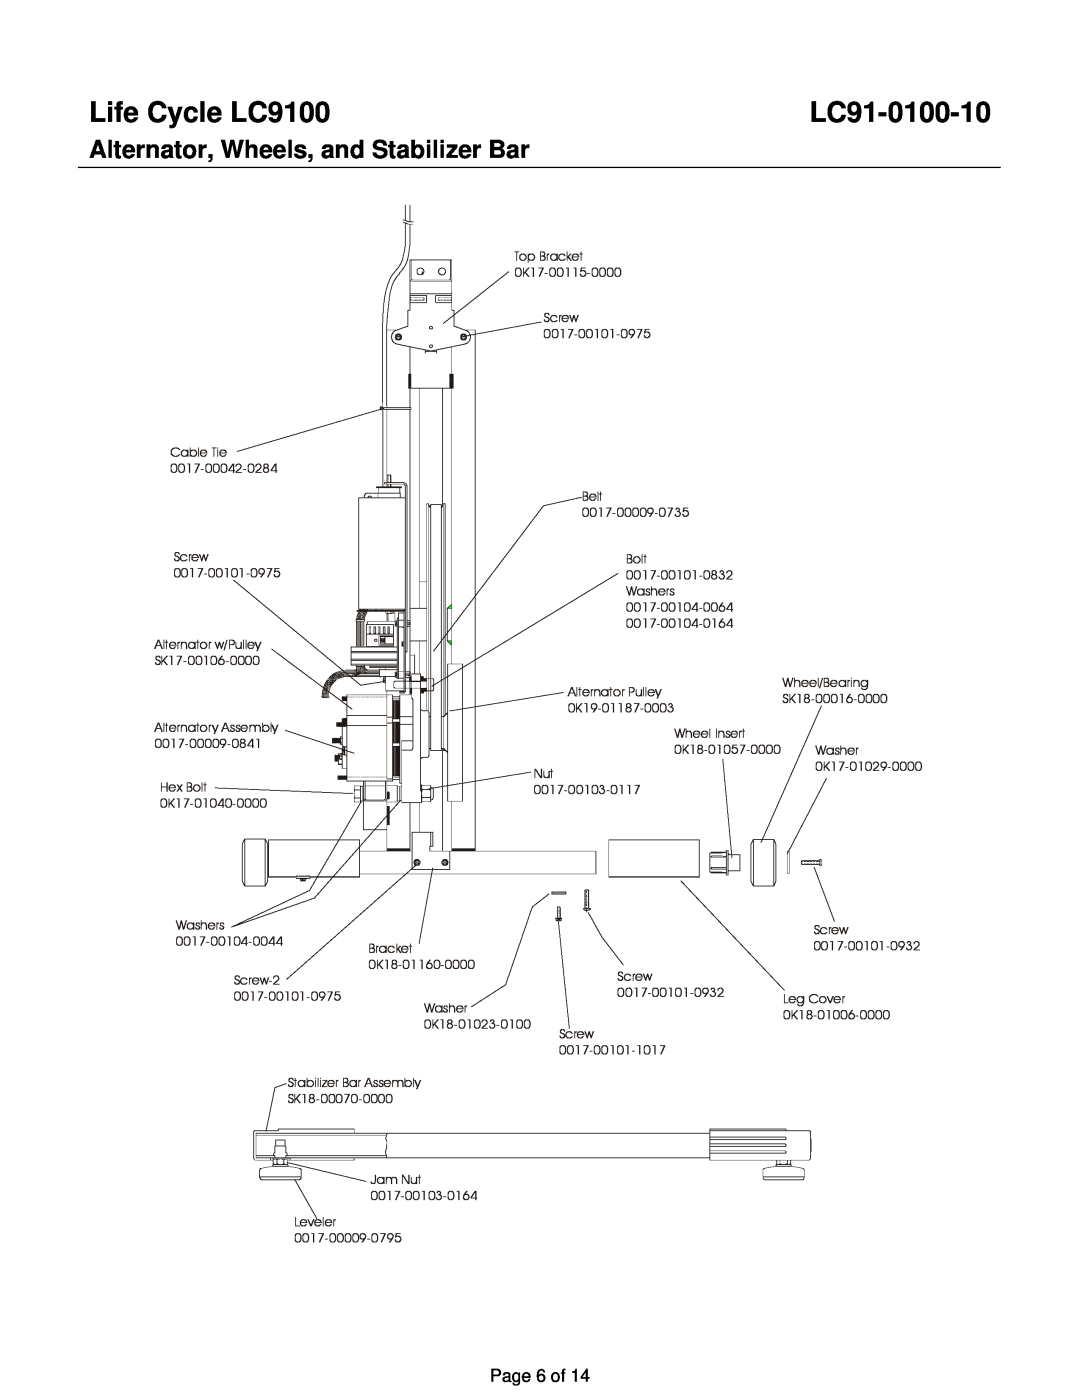 Life Fitness manual Alternator, Wheels, and Stabilizer Bar, Life Cycle LC9100, LC91-0100-10, Page 6 of 